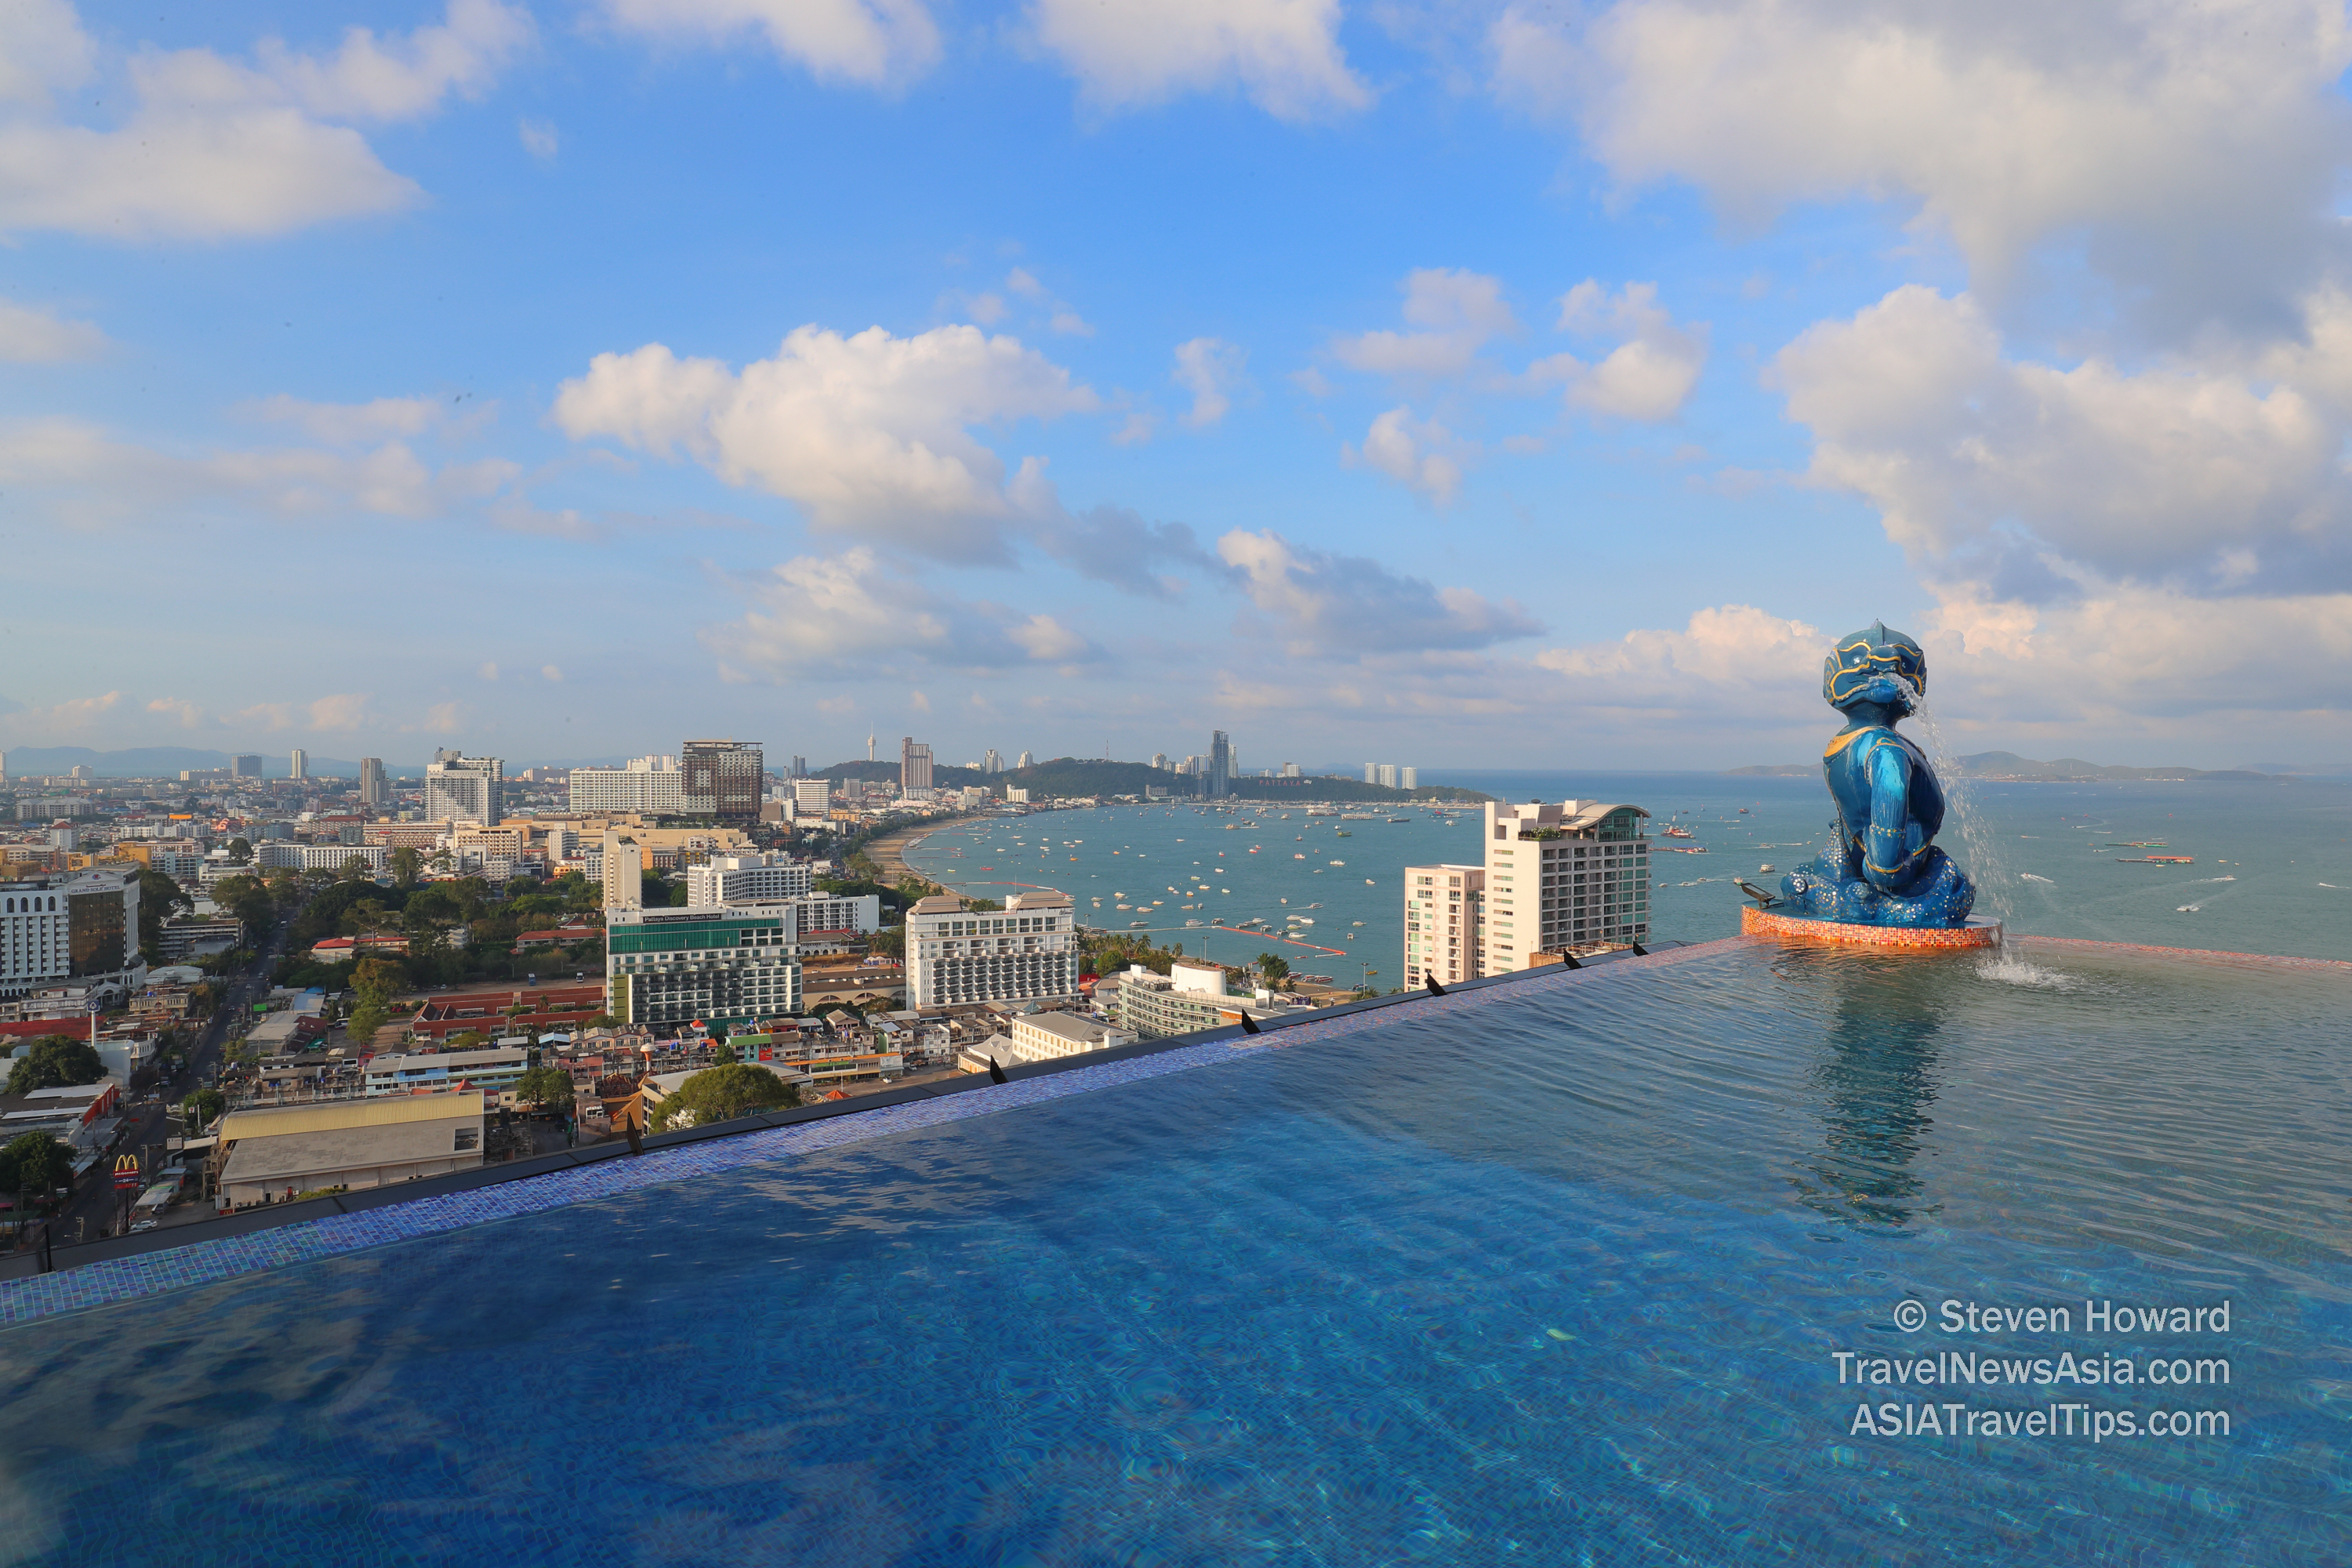 Morning view from the Sky Bar at Siam@Siam Design Hotel in Pattaya, Thailand